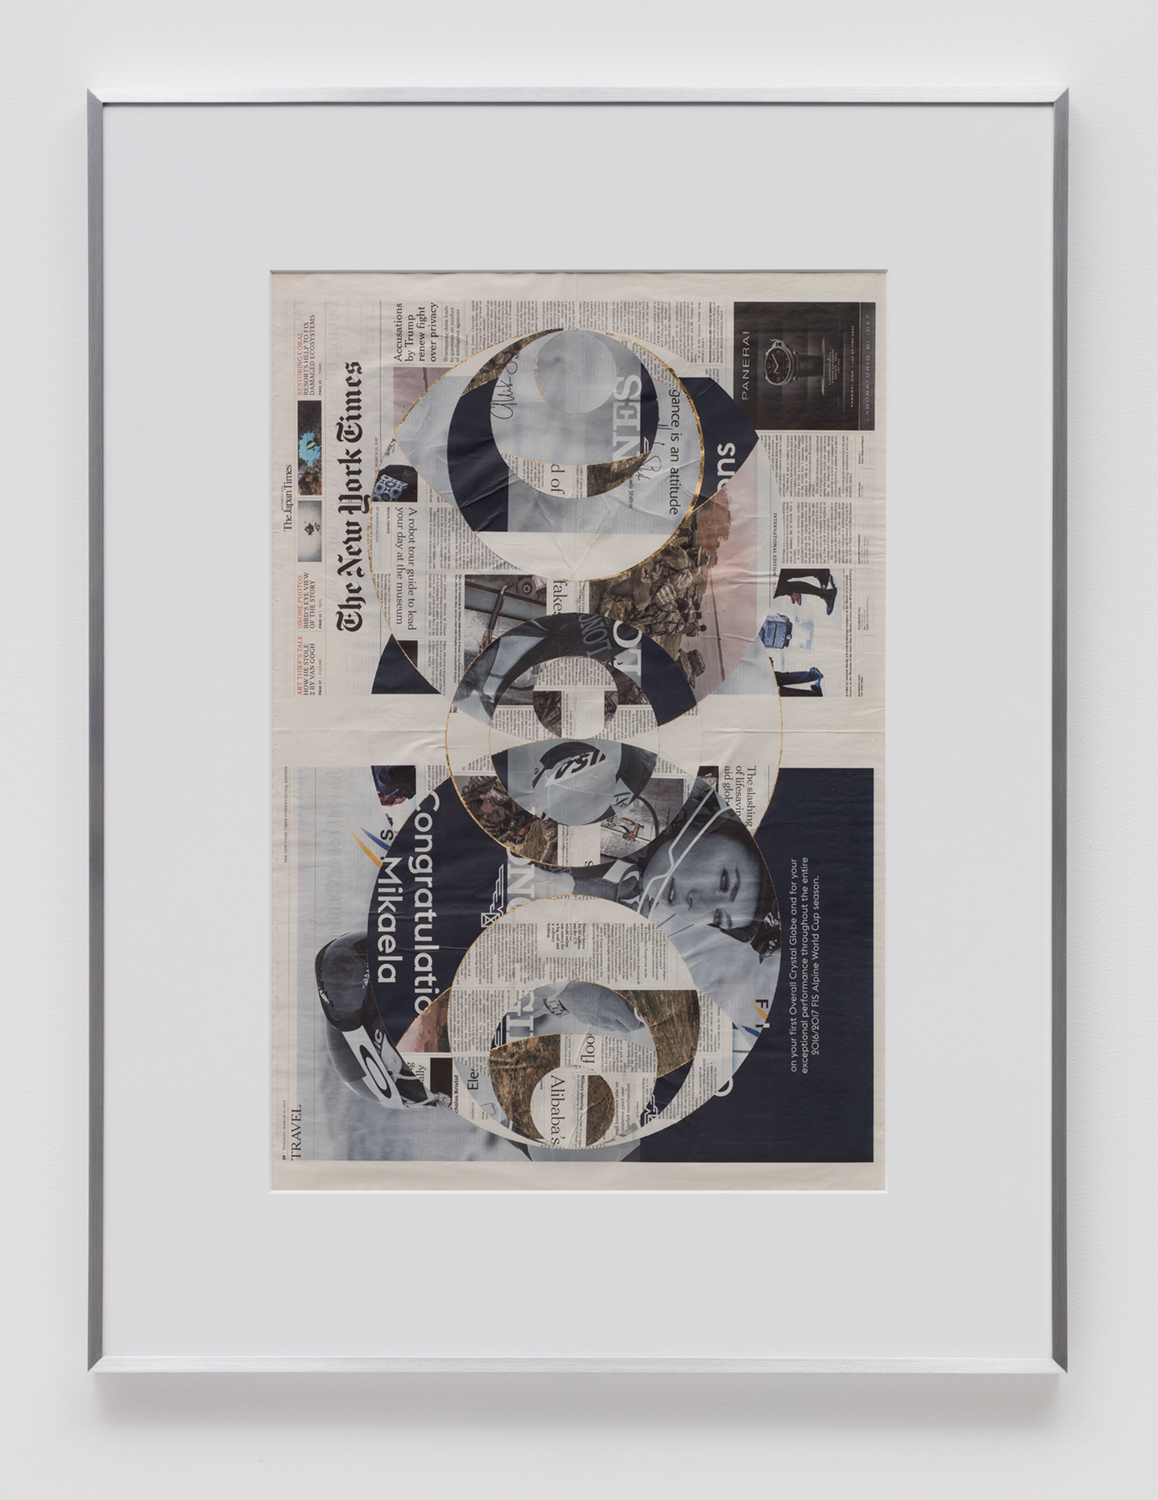   Blind Collage (Four 180º Rotations, The New York Times International Edition Distributed with The Japan Times, Tuesday, March 21, 2017)   2017  Newspaper, tape, and 22 karat gold leaf  43 5/8 x 33 1/8 inches   Blind Collages, 2017–   Exhibition:  T